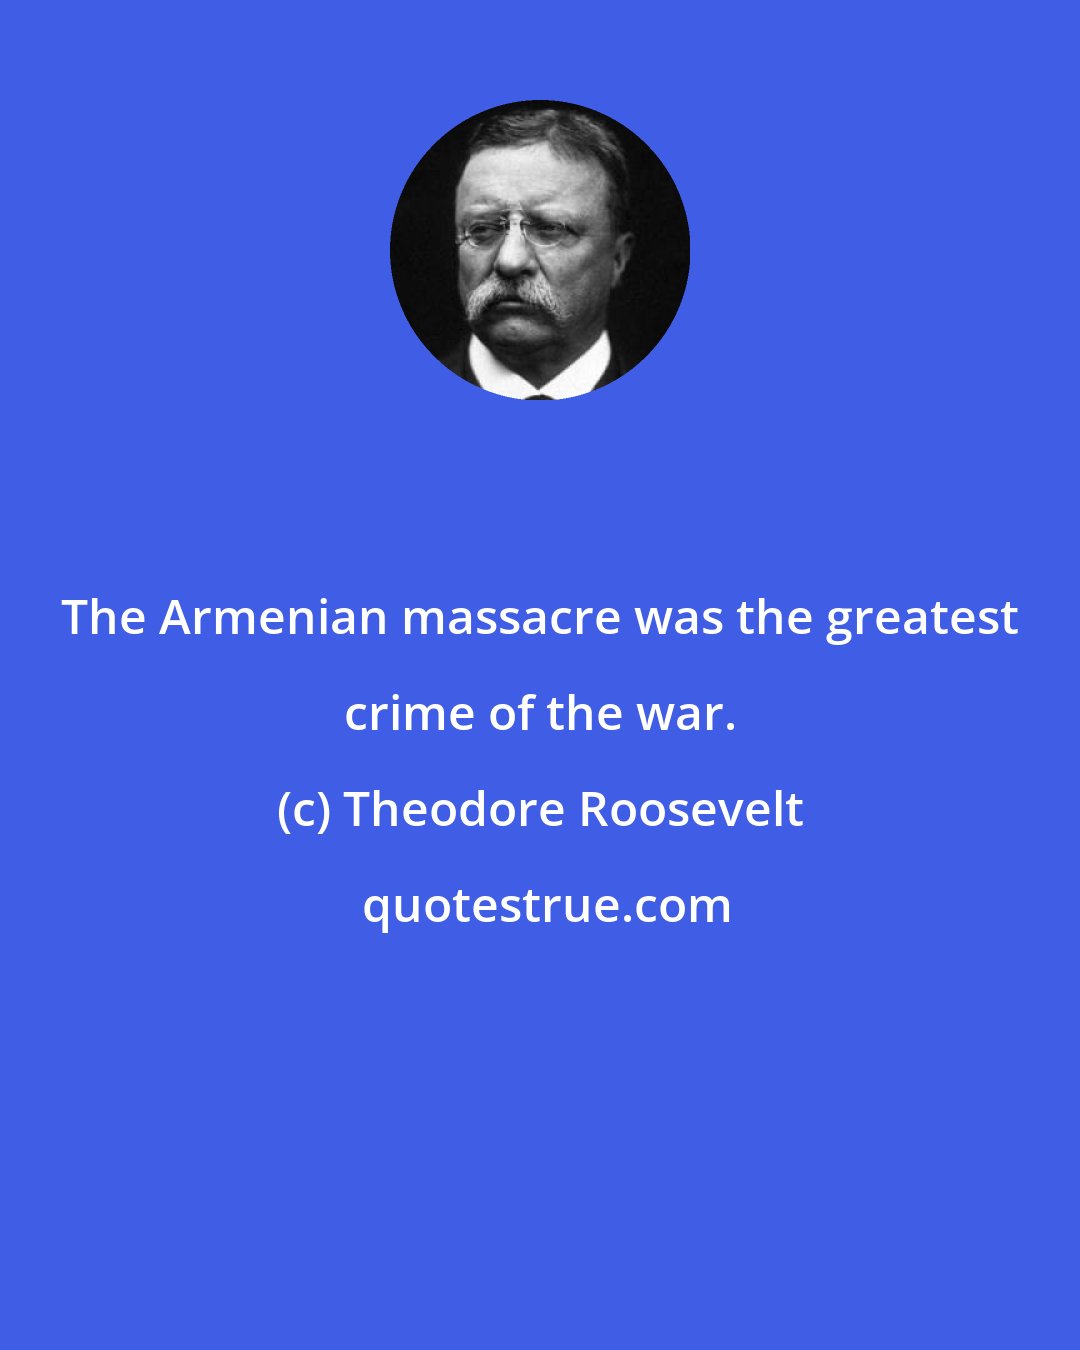 Theodore Roosevelt: The Armenian massacre was the greatest crime of the war.